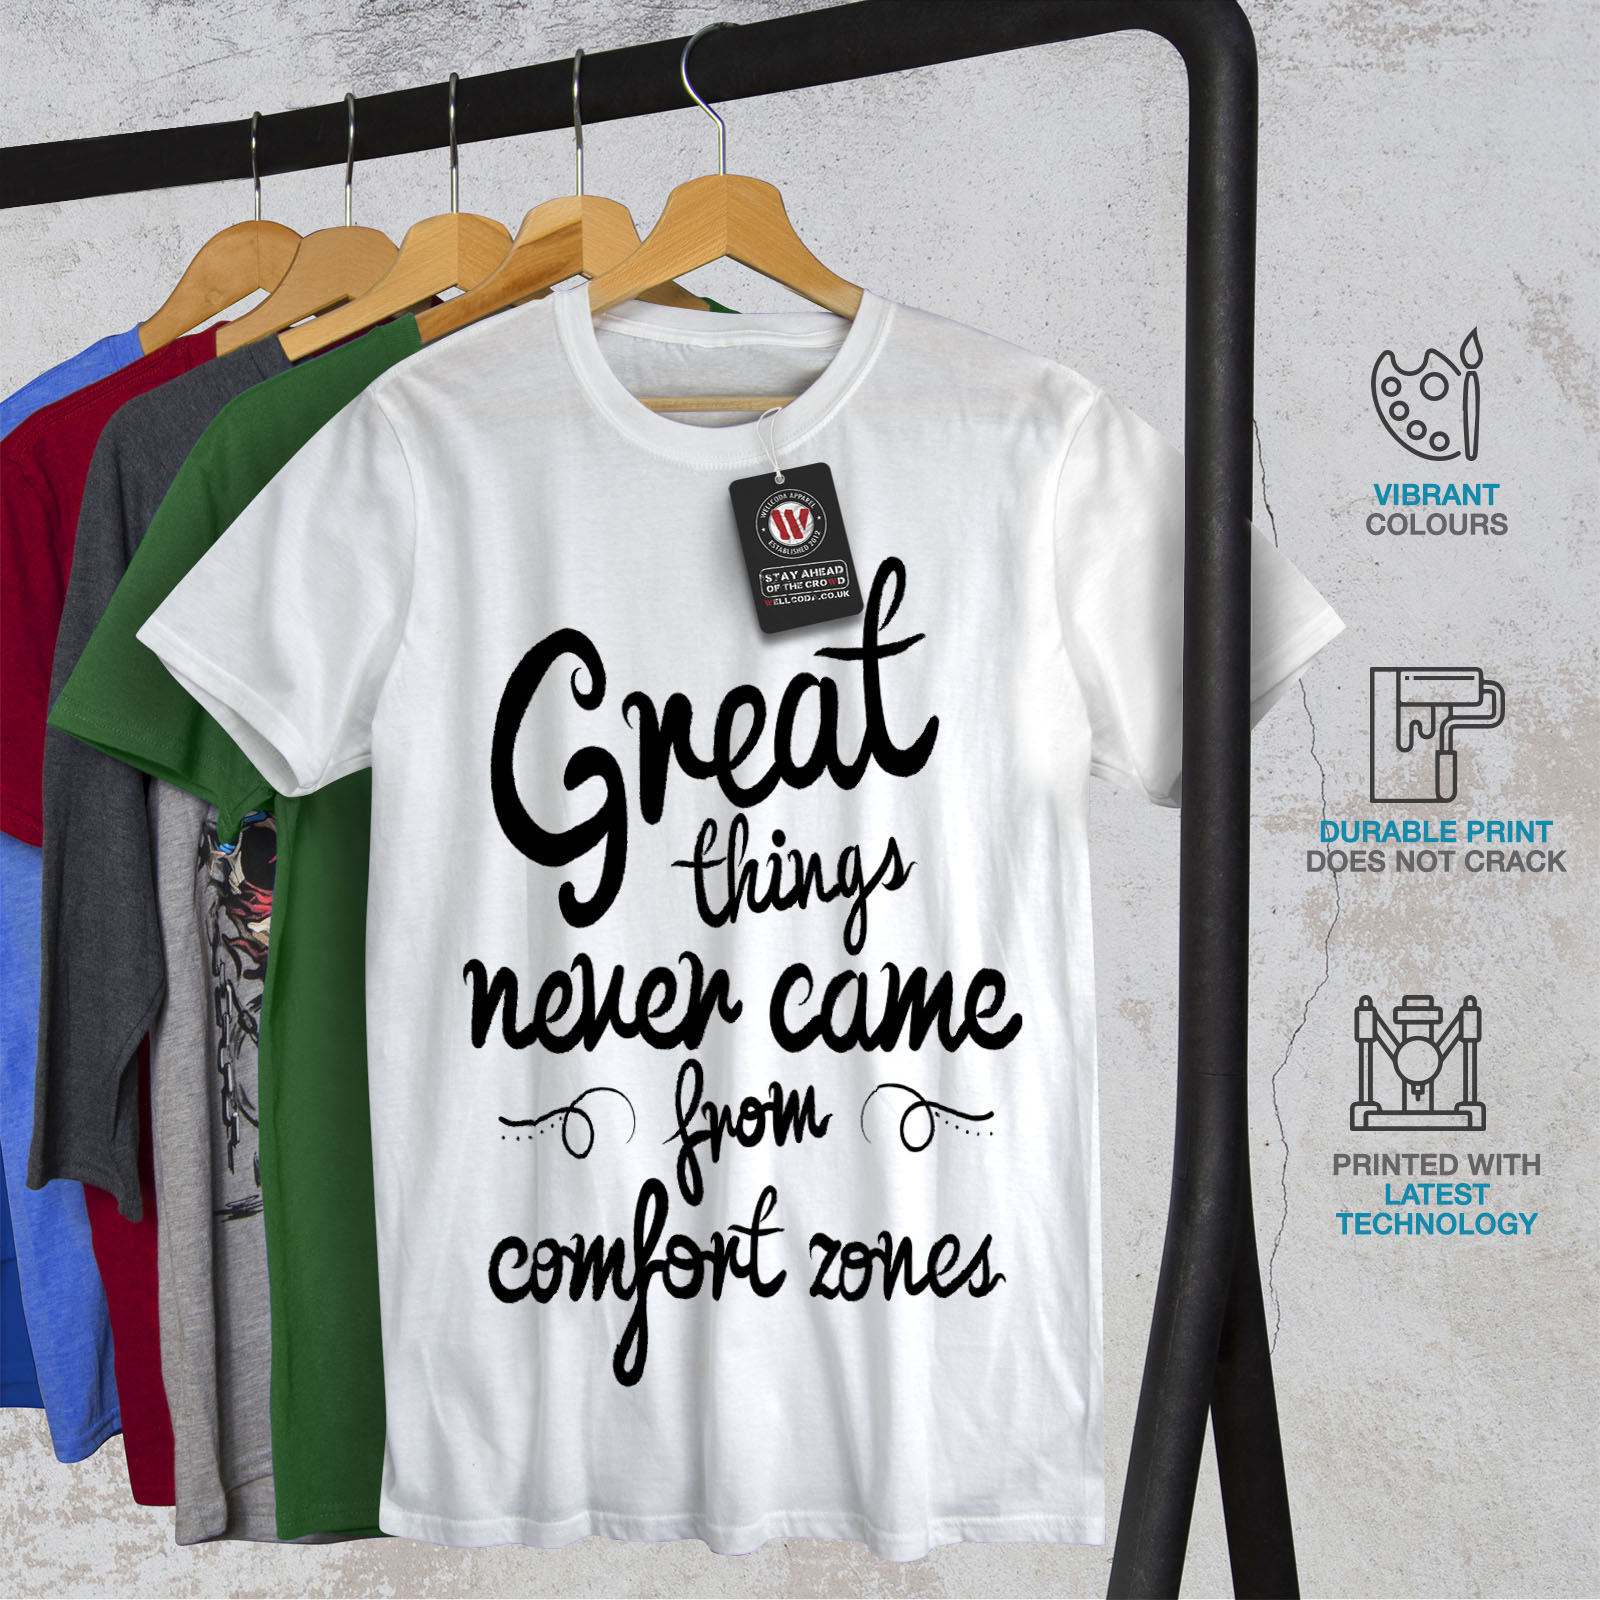 Inspiration Graphic Design Printed Tee Details about   Wellcoda Comfort Zones Mens T-shirt